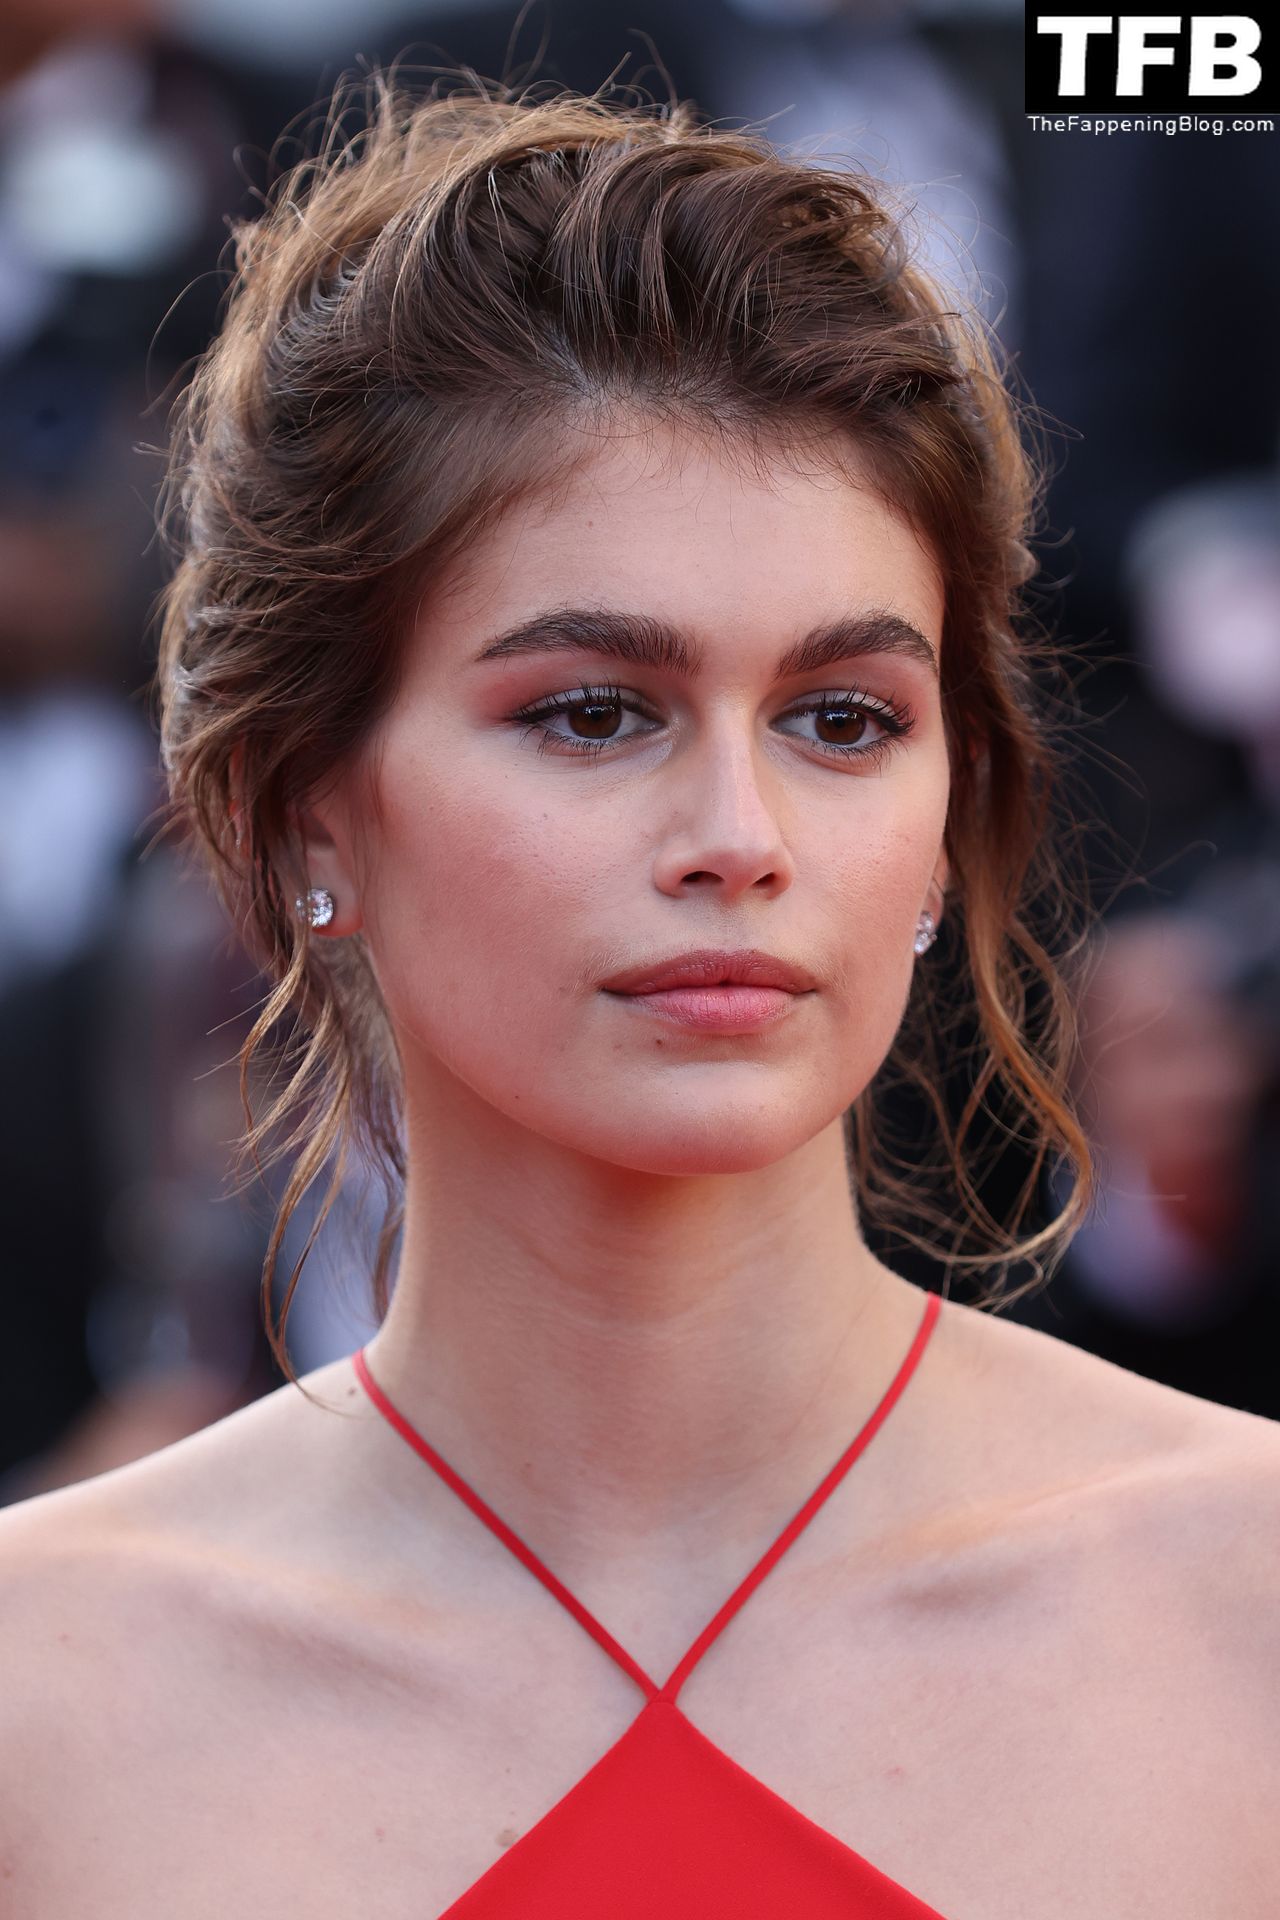 Kaia-Gerber-Sexy-The-Fappening-Blog-33.jpg